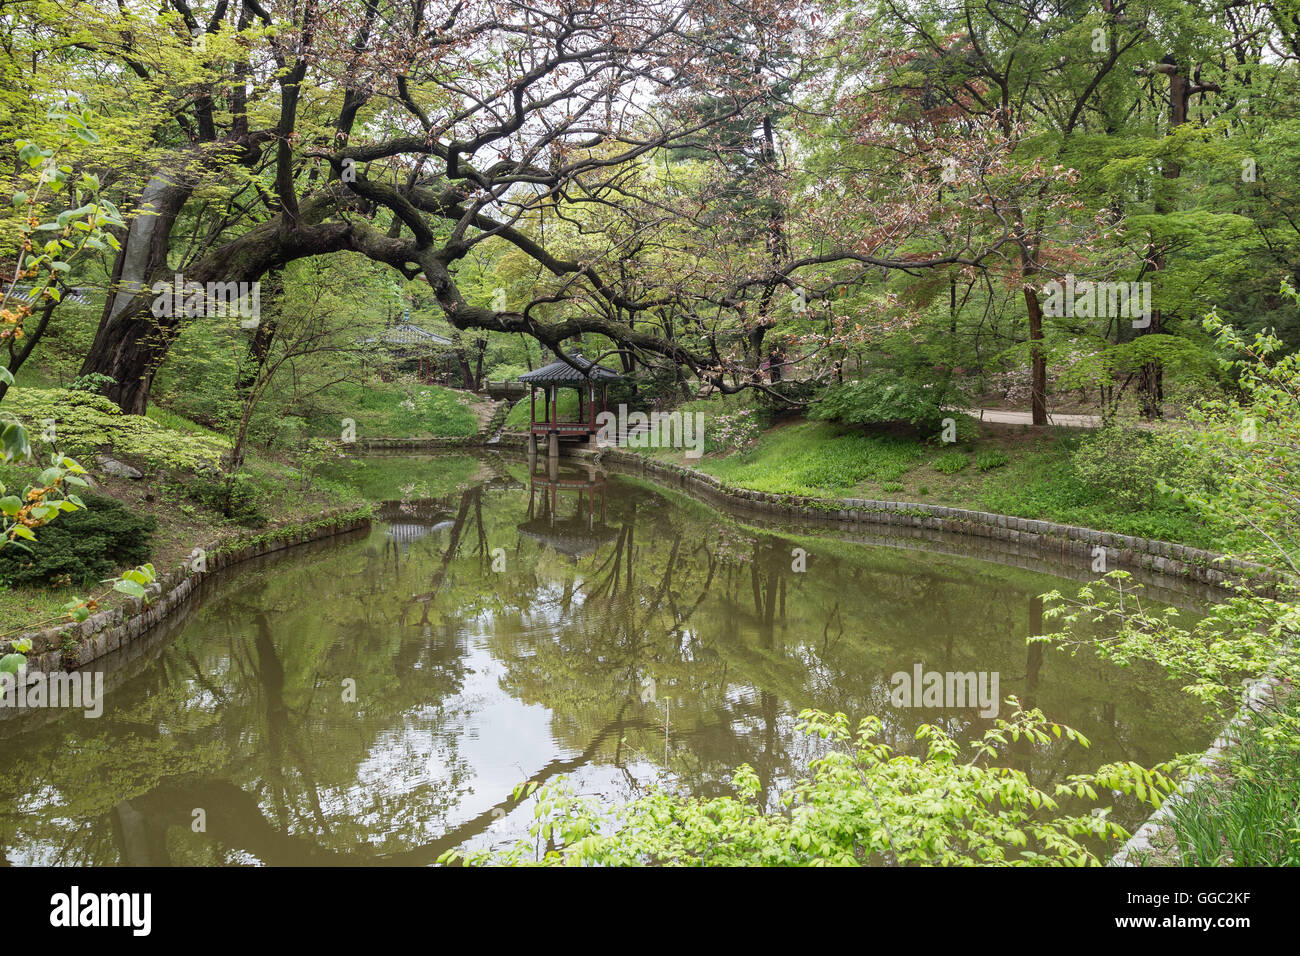 Scenic view of lush nature and a pond at Huwon (Secret Garden) at the Changdeokgung Palace in Seoul, South Korea. Stock Photo